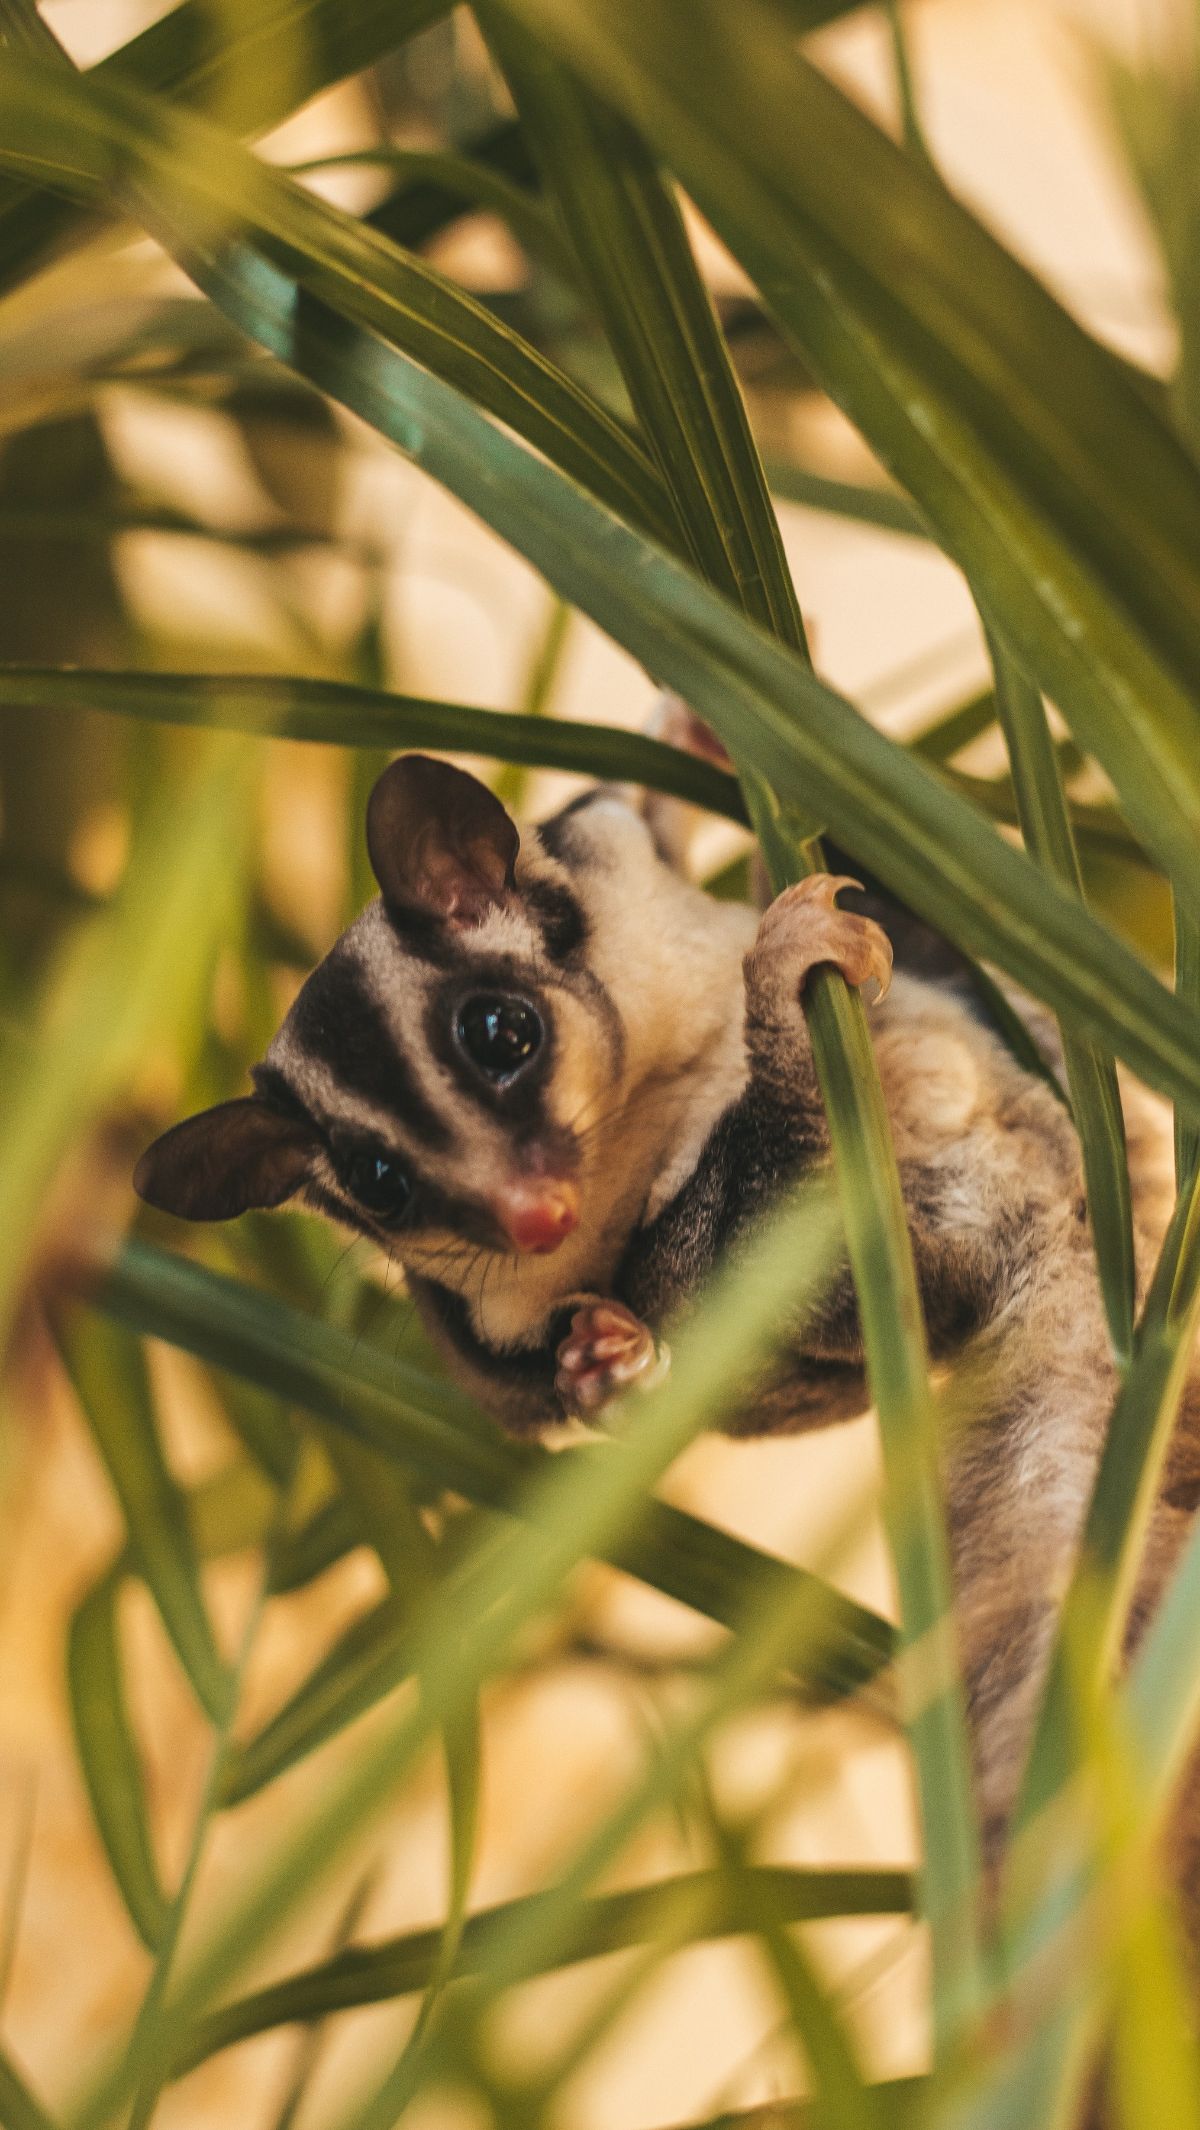 10 Unique Sugar Glider Facts You Should Know Before Having One